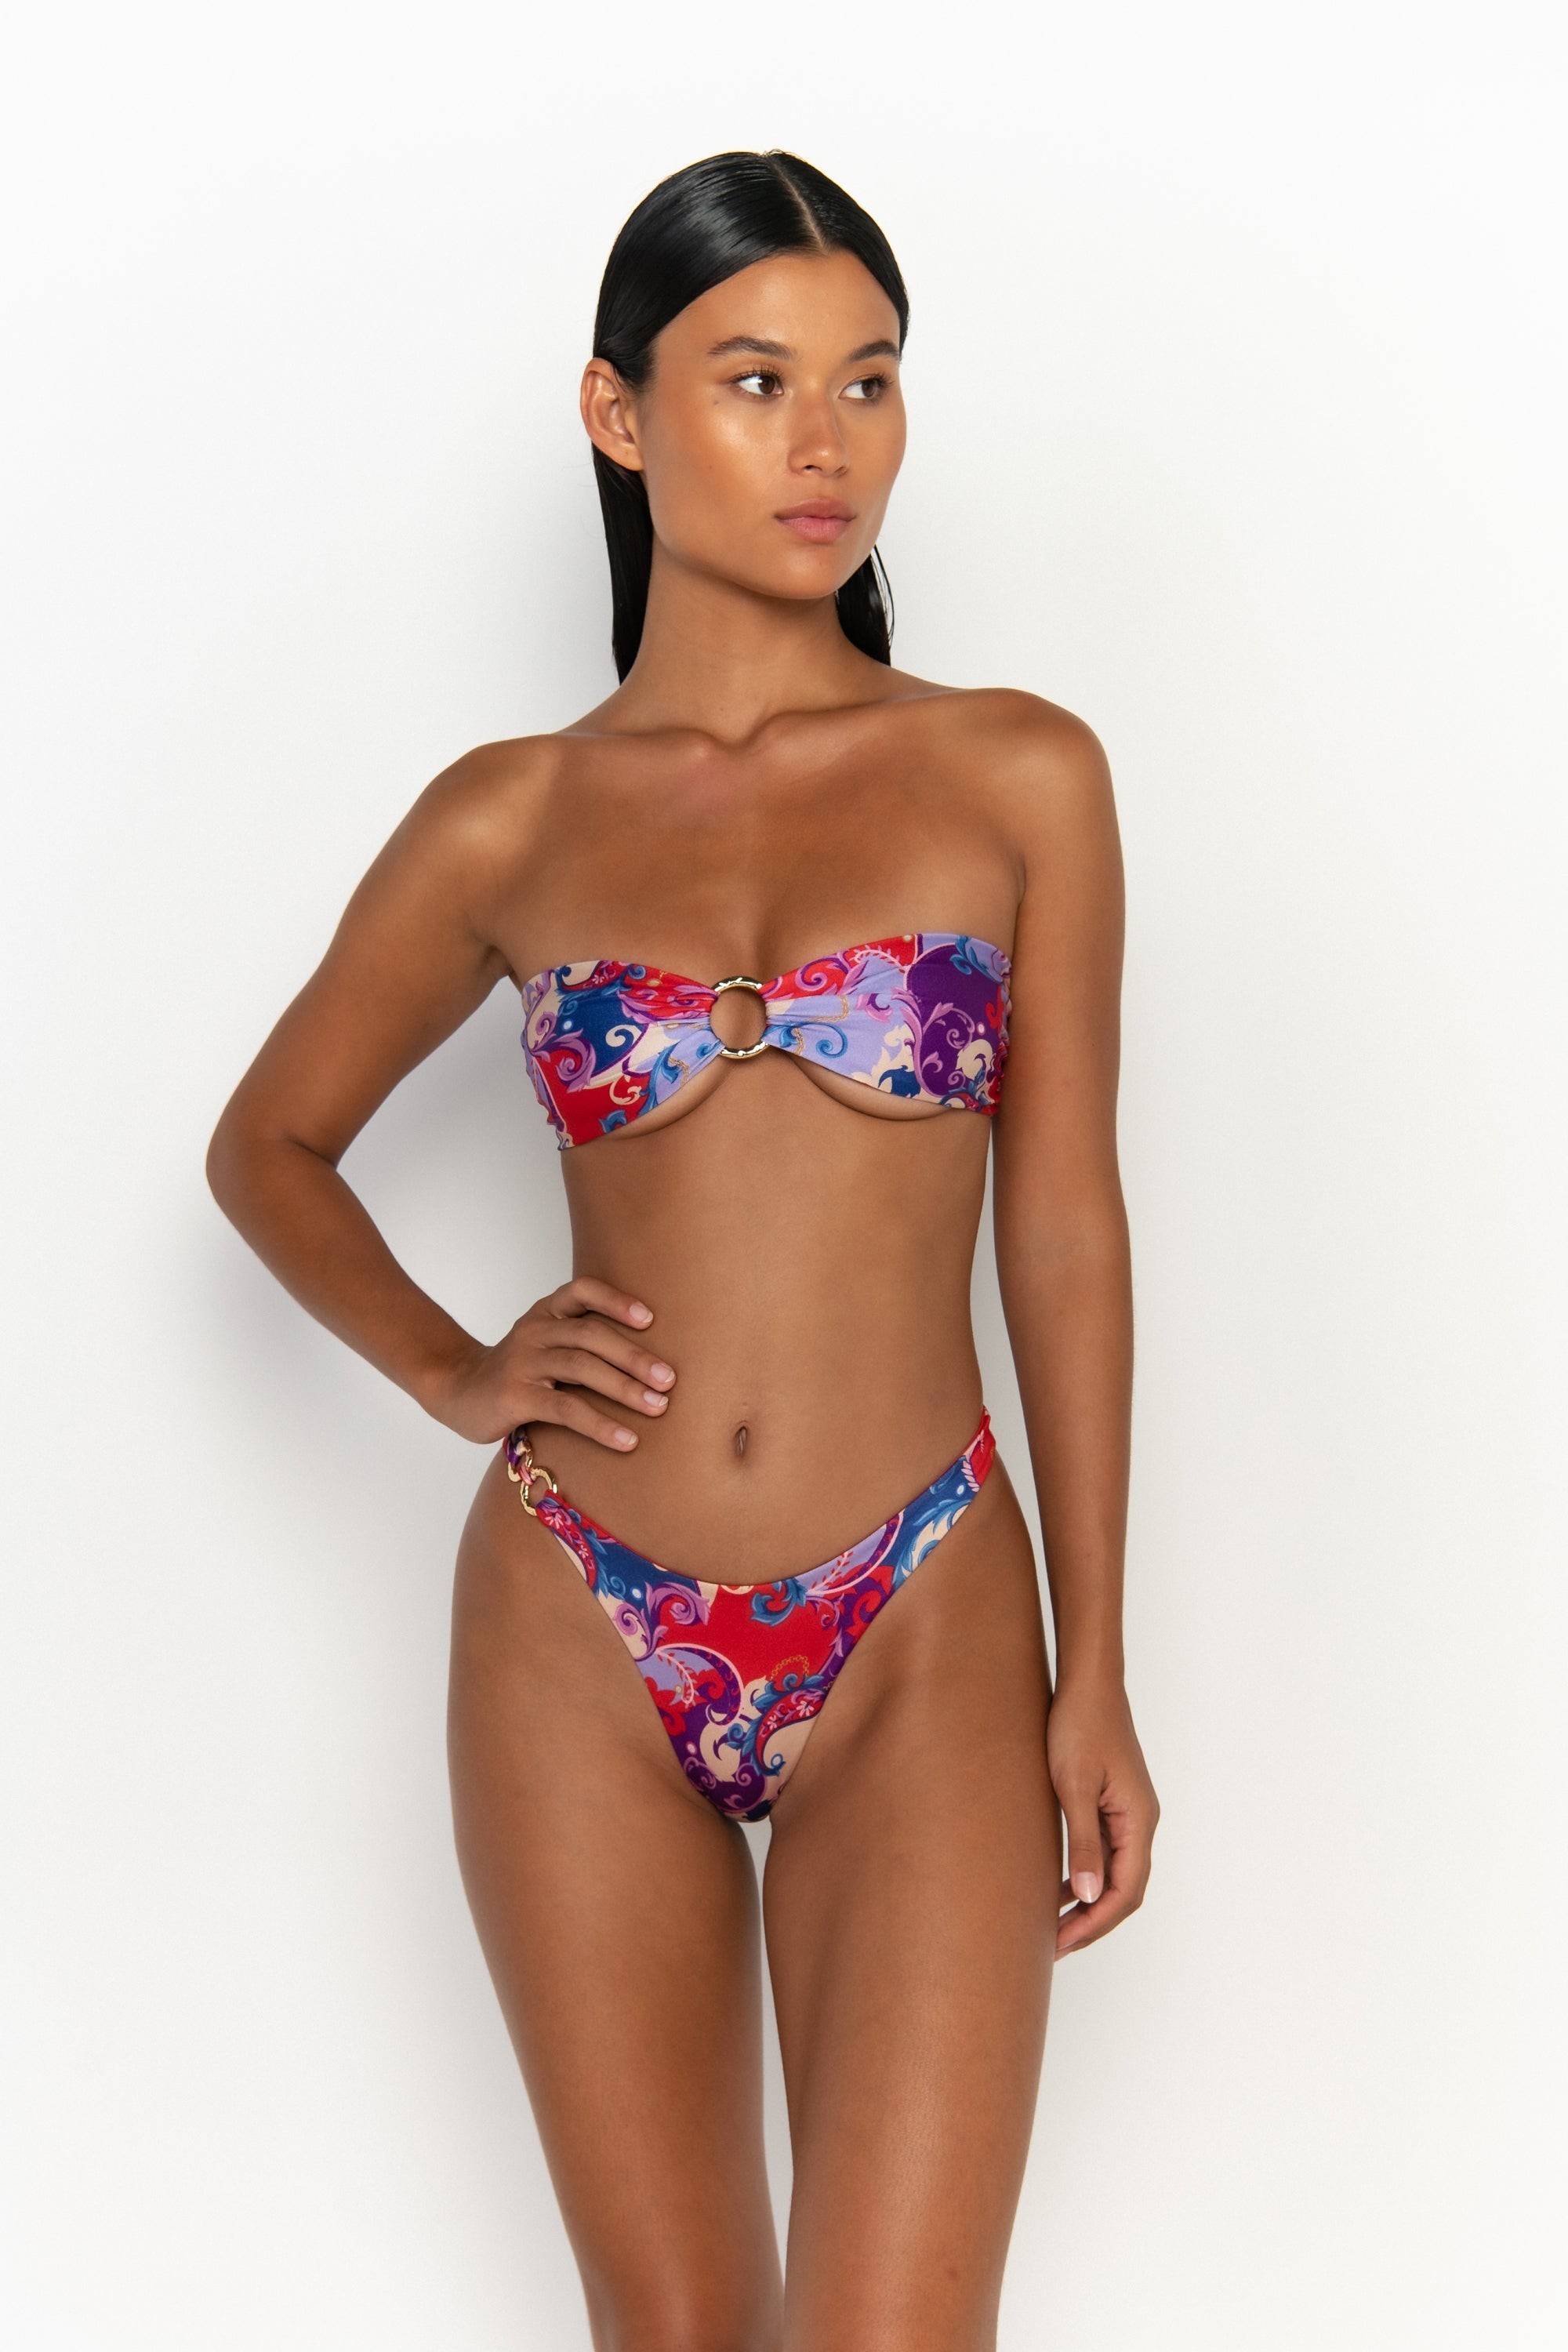 front view elegant woman wearing luxury swimsuit from sommer swim - cece rococo is a print bikini with a bandeau bikini top